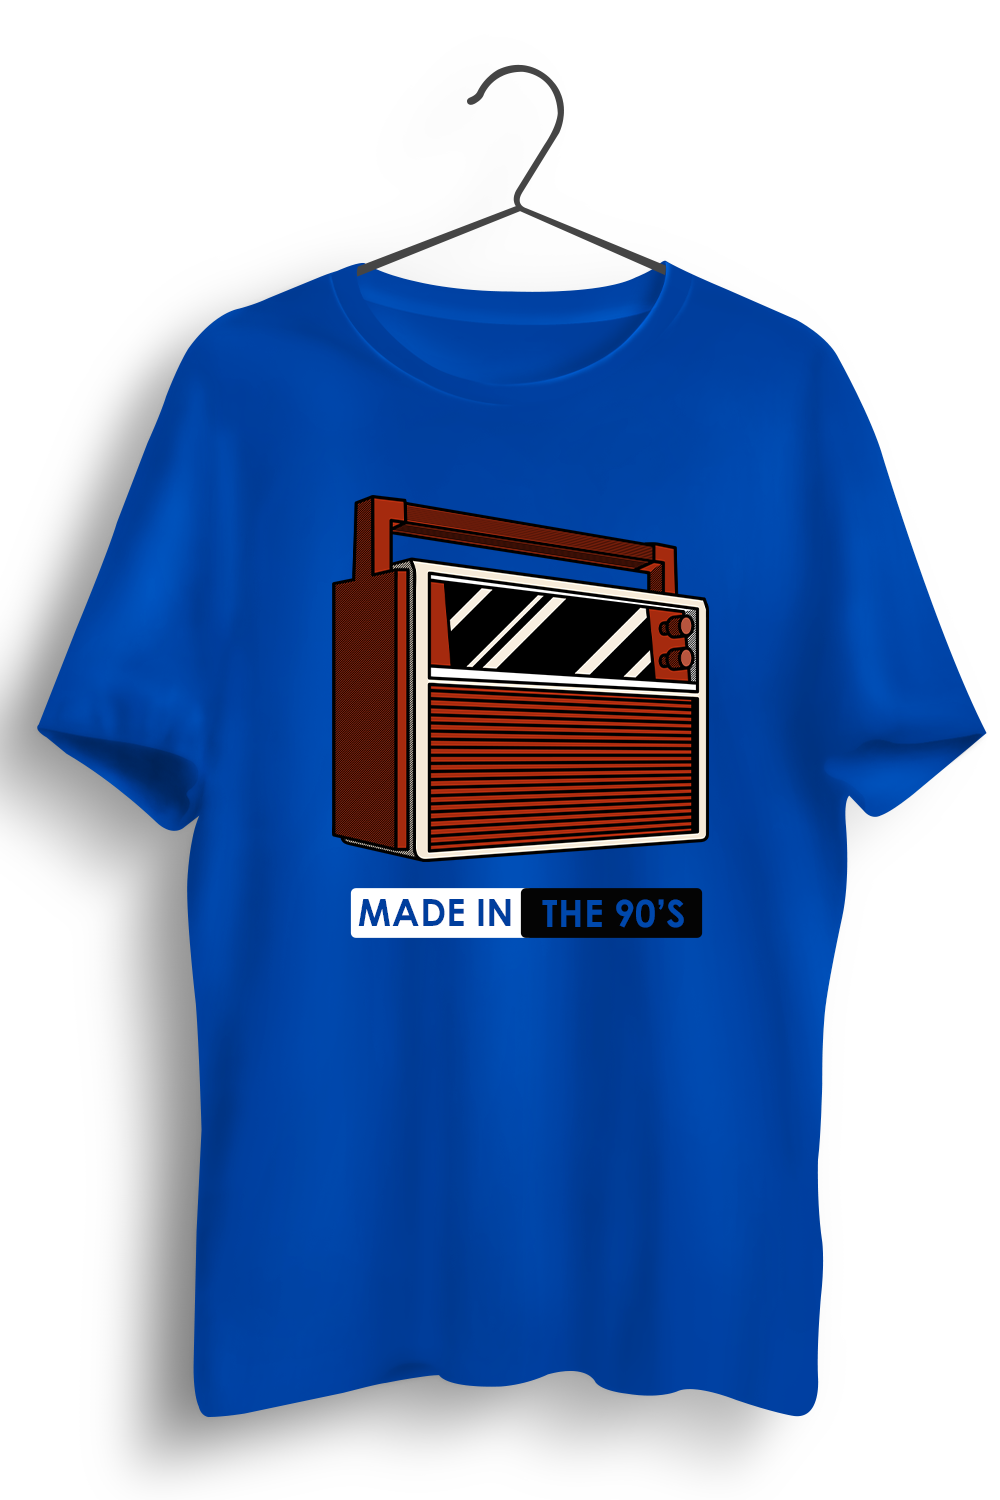 Made In The 90s Graphic Printed Blue Tshirt